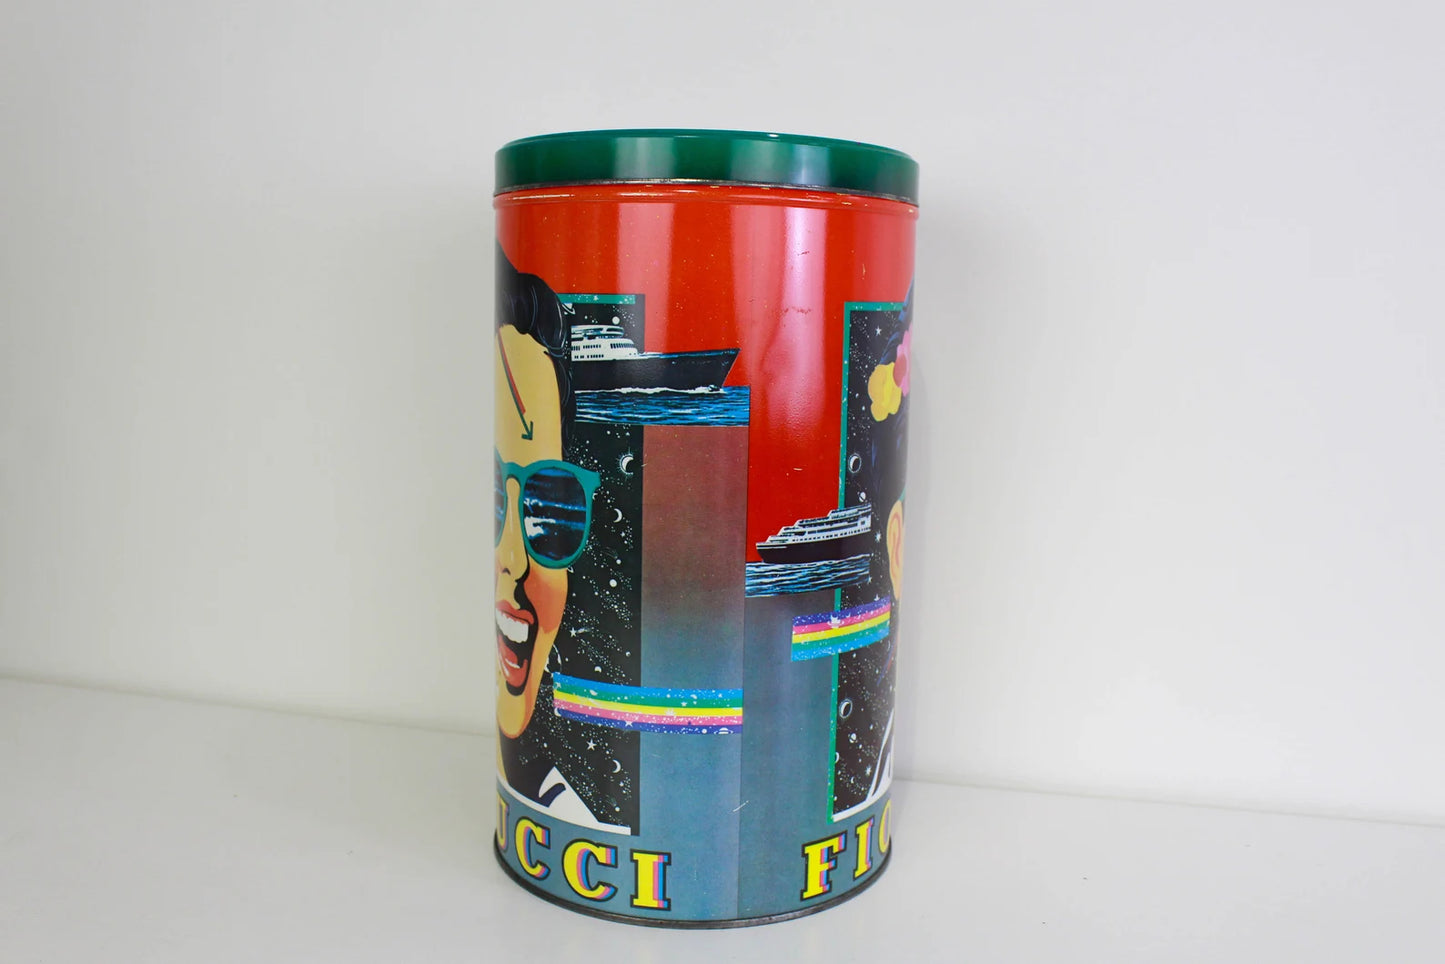 1970s Fiorucci Can "The Maui Chip", Vintage Fiorucci Tin Canister, Collectible Memoribilia, Fiorucci Andy Warhol Pop Art Style Metal Can